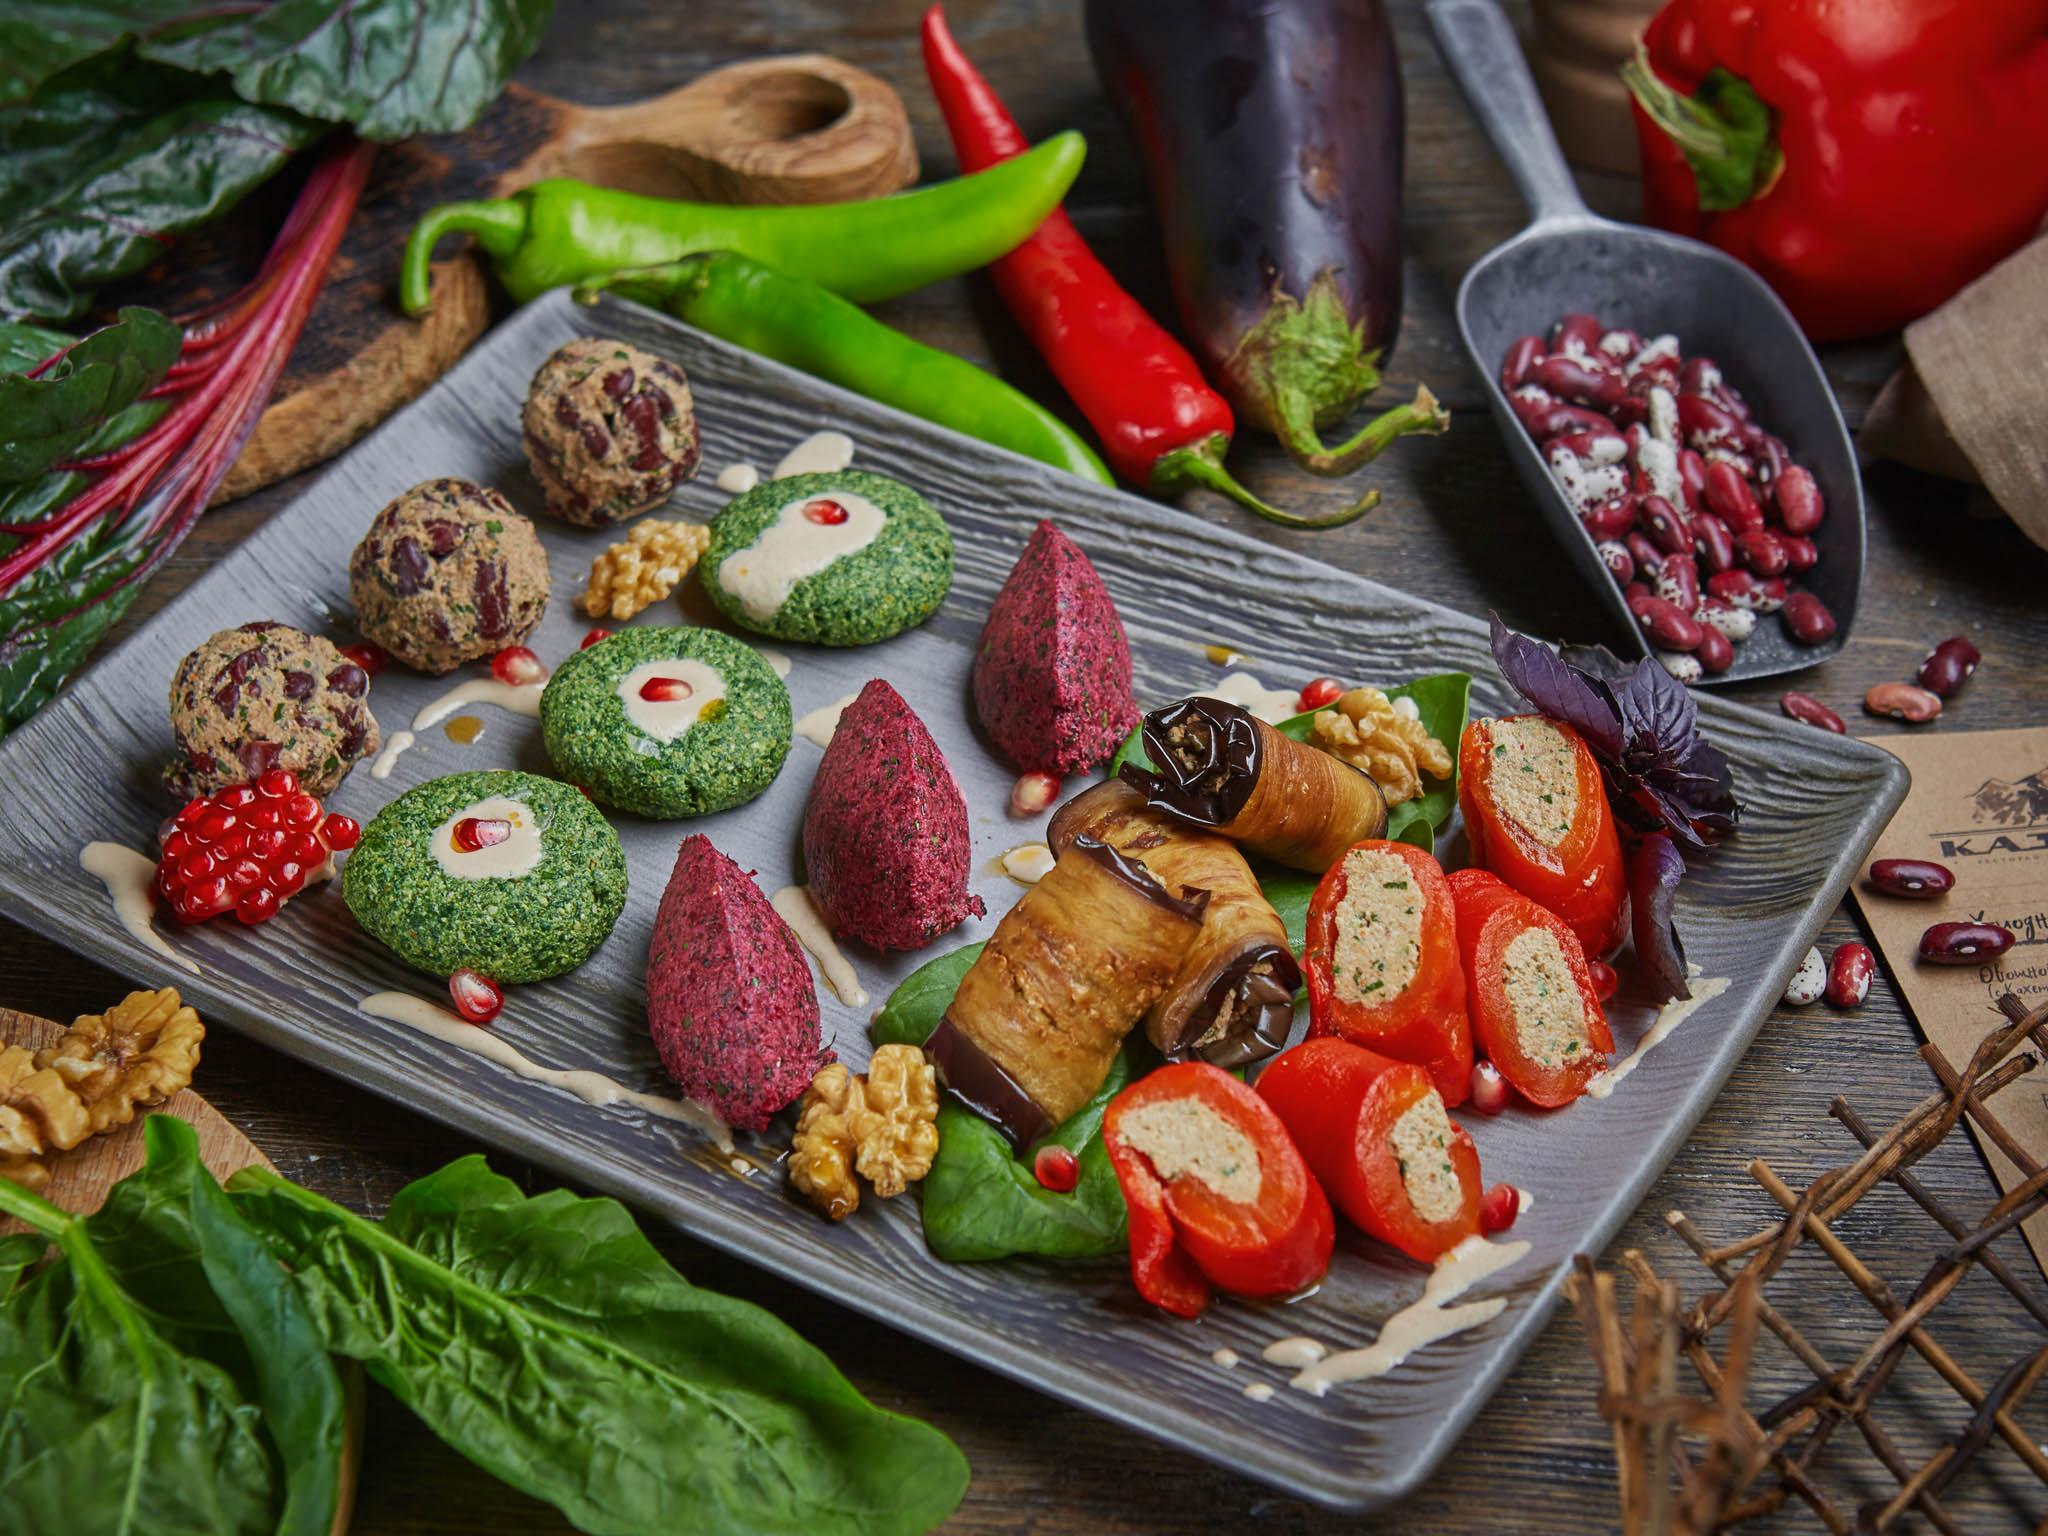 Kazbek’s menu focuses on the staples: walnuts, lamb, spices, pomegranate, spinach, cheese and breads